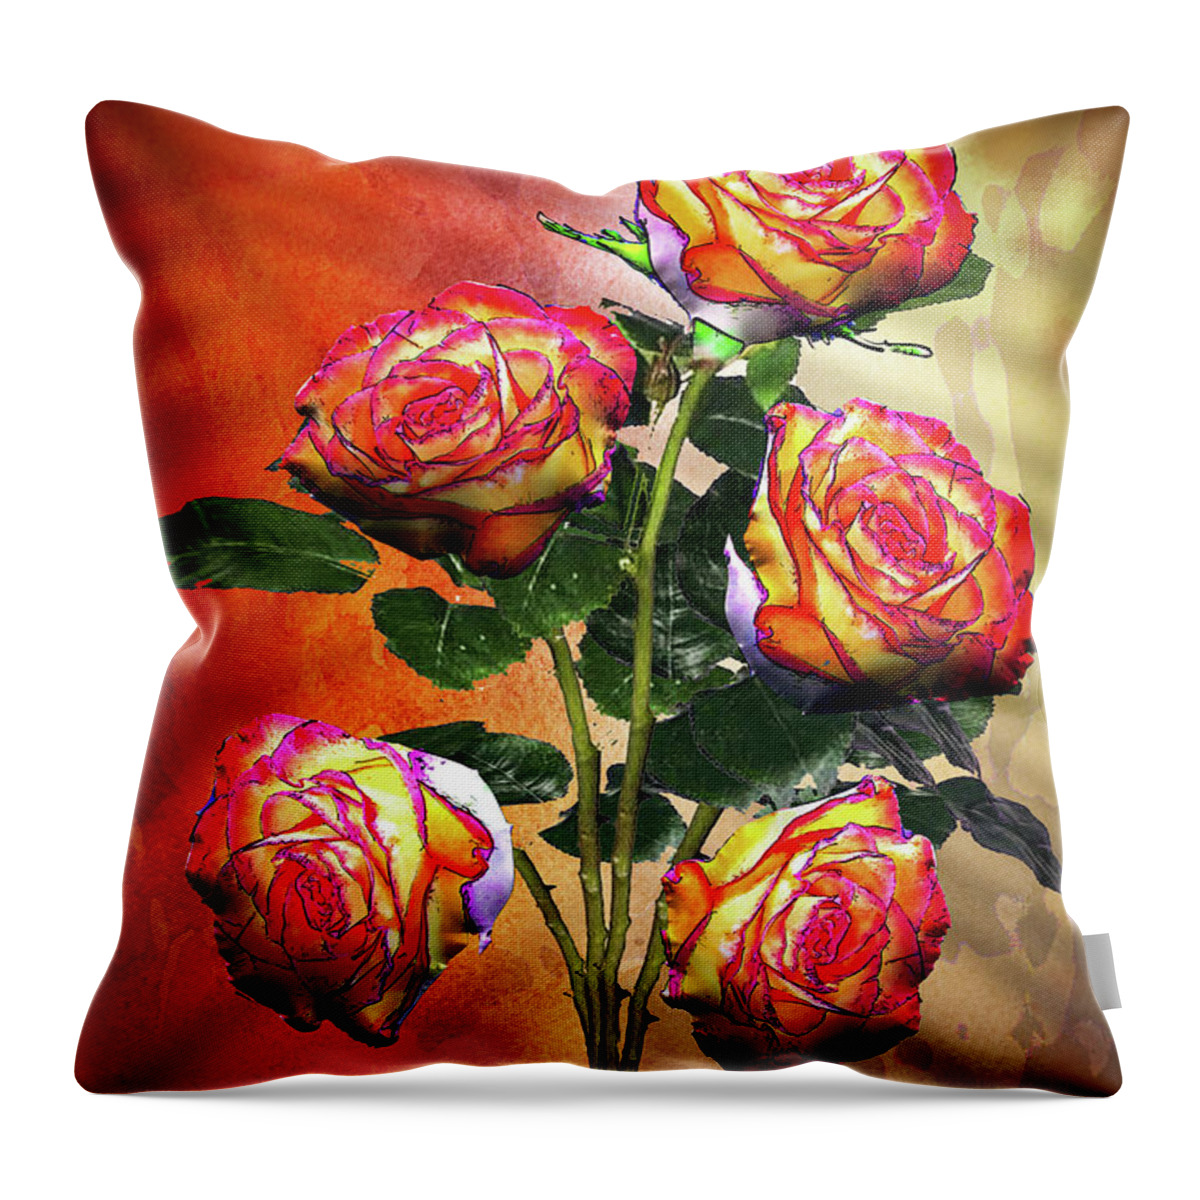 Rose Throw Pillow featuring the digital art Five Roses by Anthony Ellis